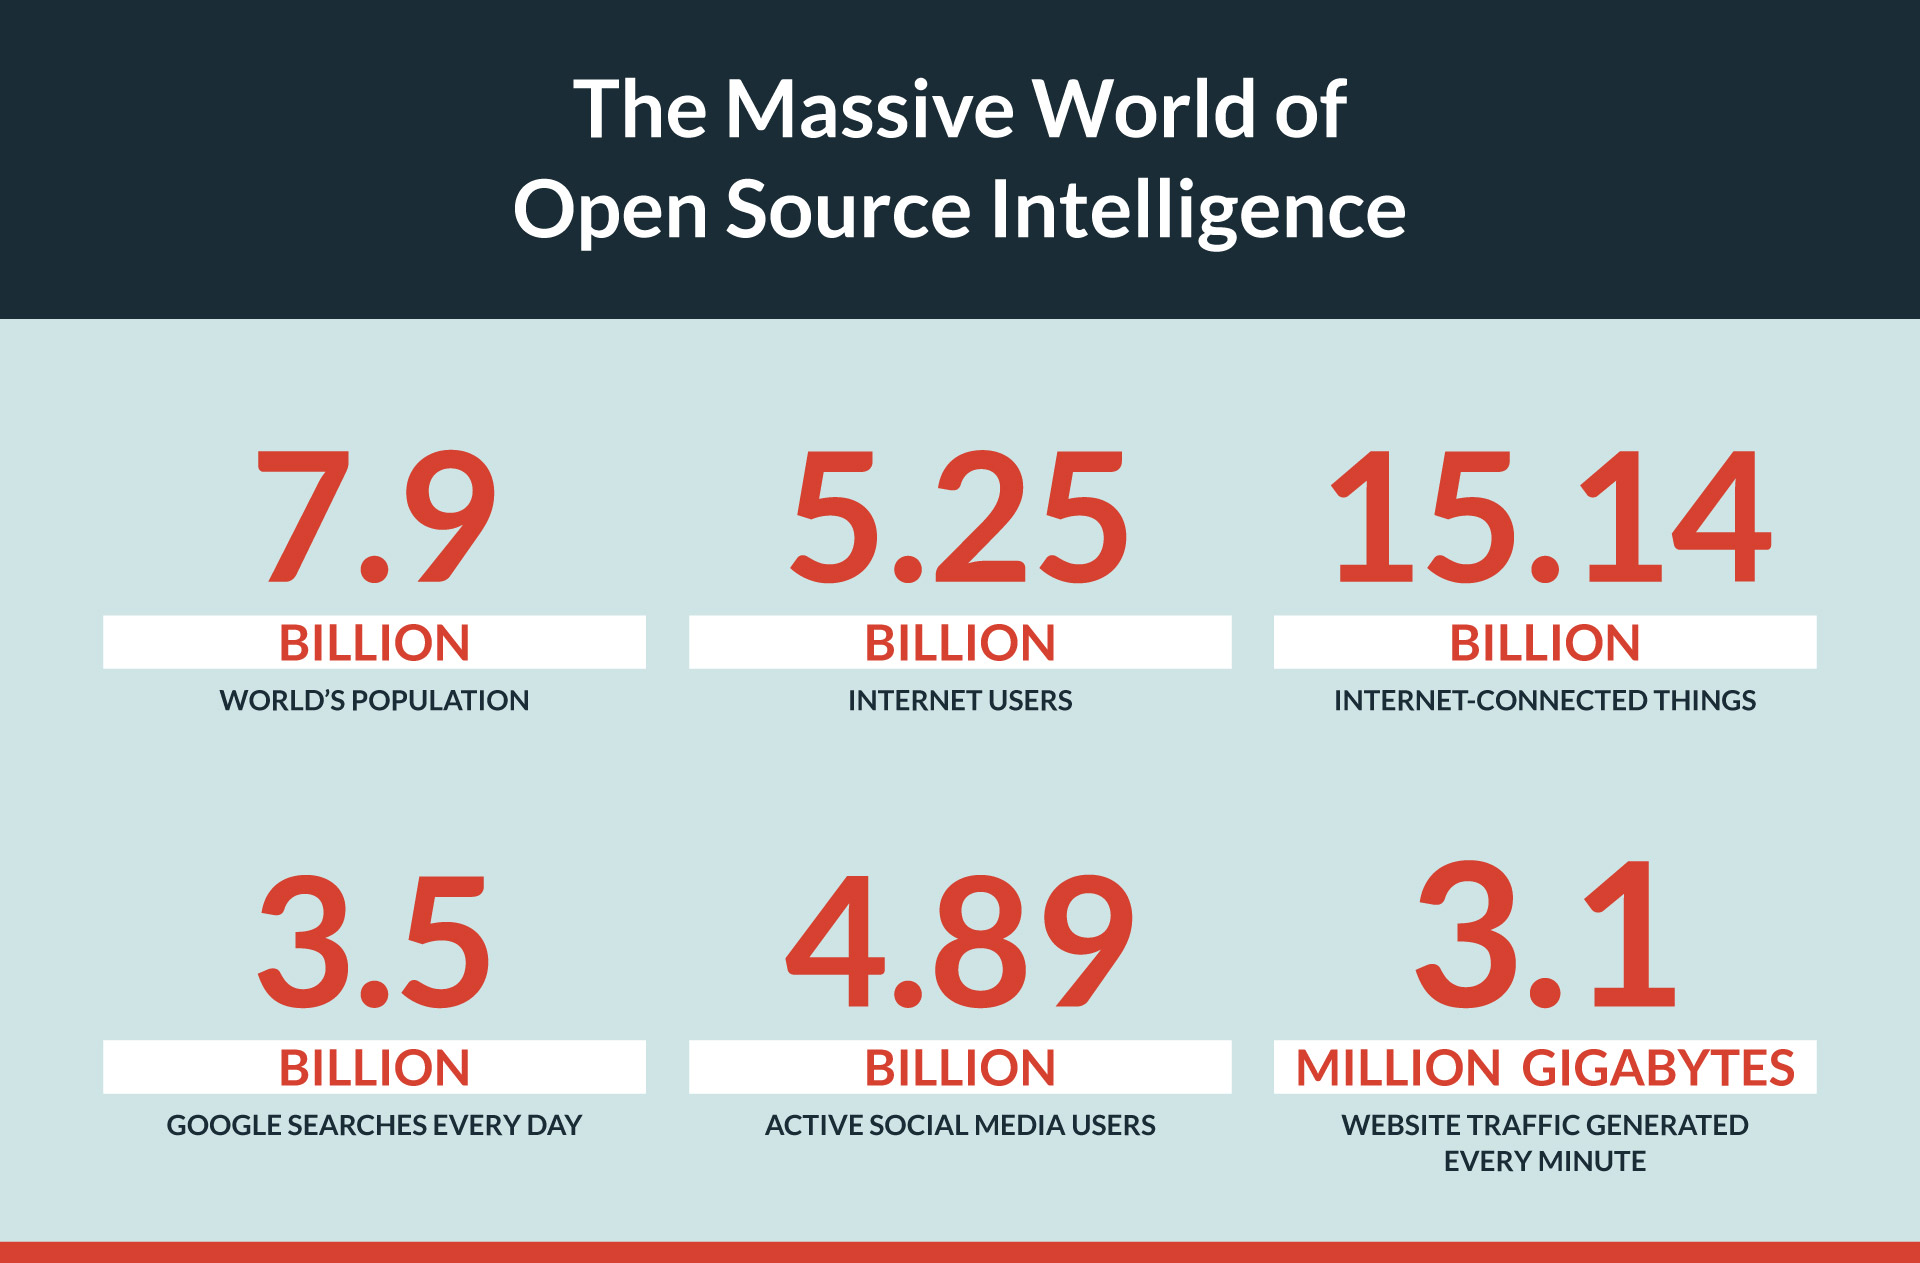 This infographic shows that there are 5.25 billion internet users, 15.14 billion internet-connected things, and 3.5 billion Google searches every day.